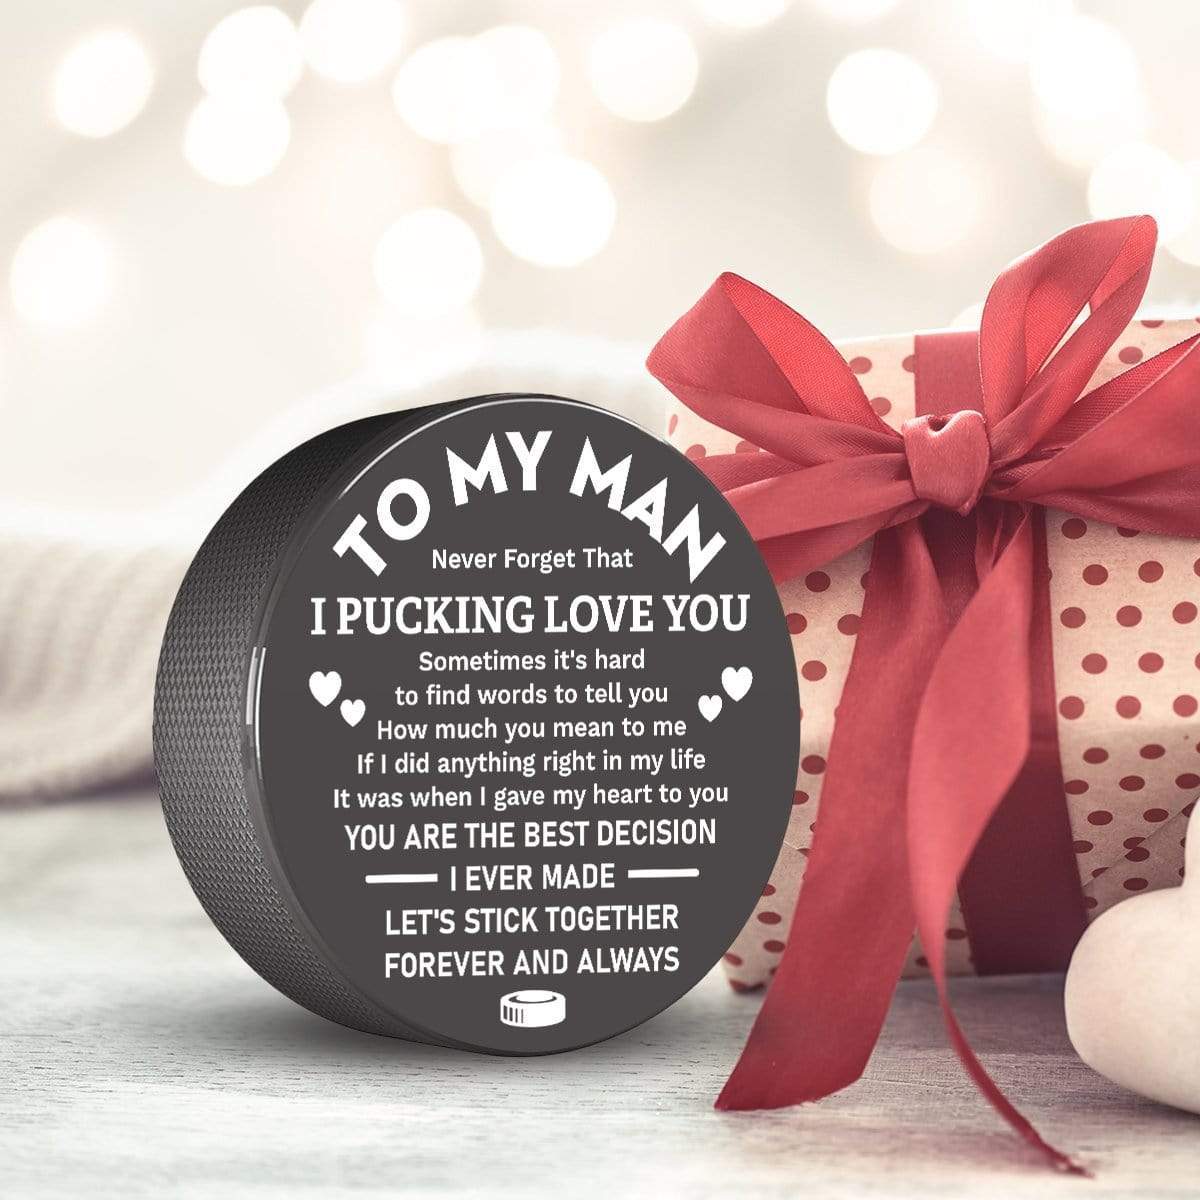 Hockey Puck - Hockey - To My Man - Let's Stick Together Forever And Always - Gai26013